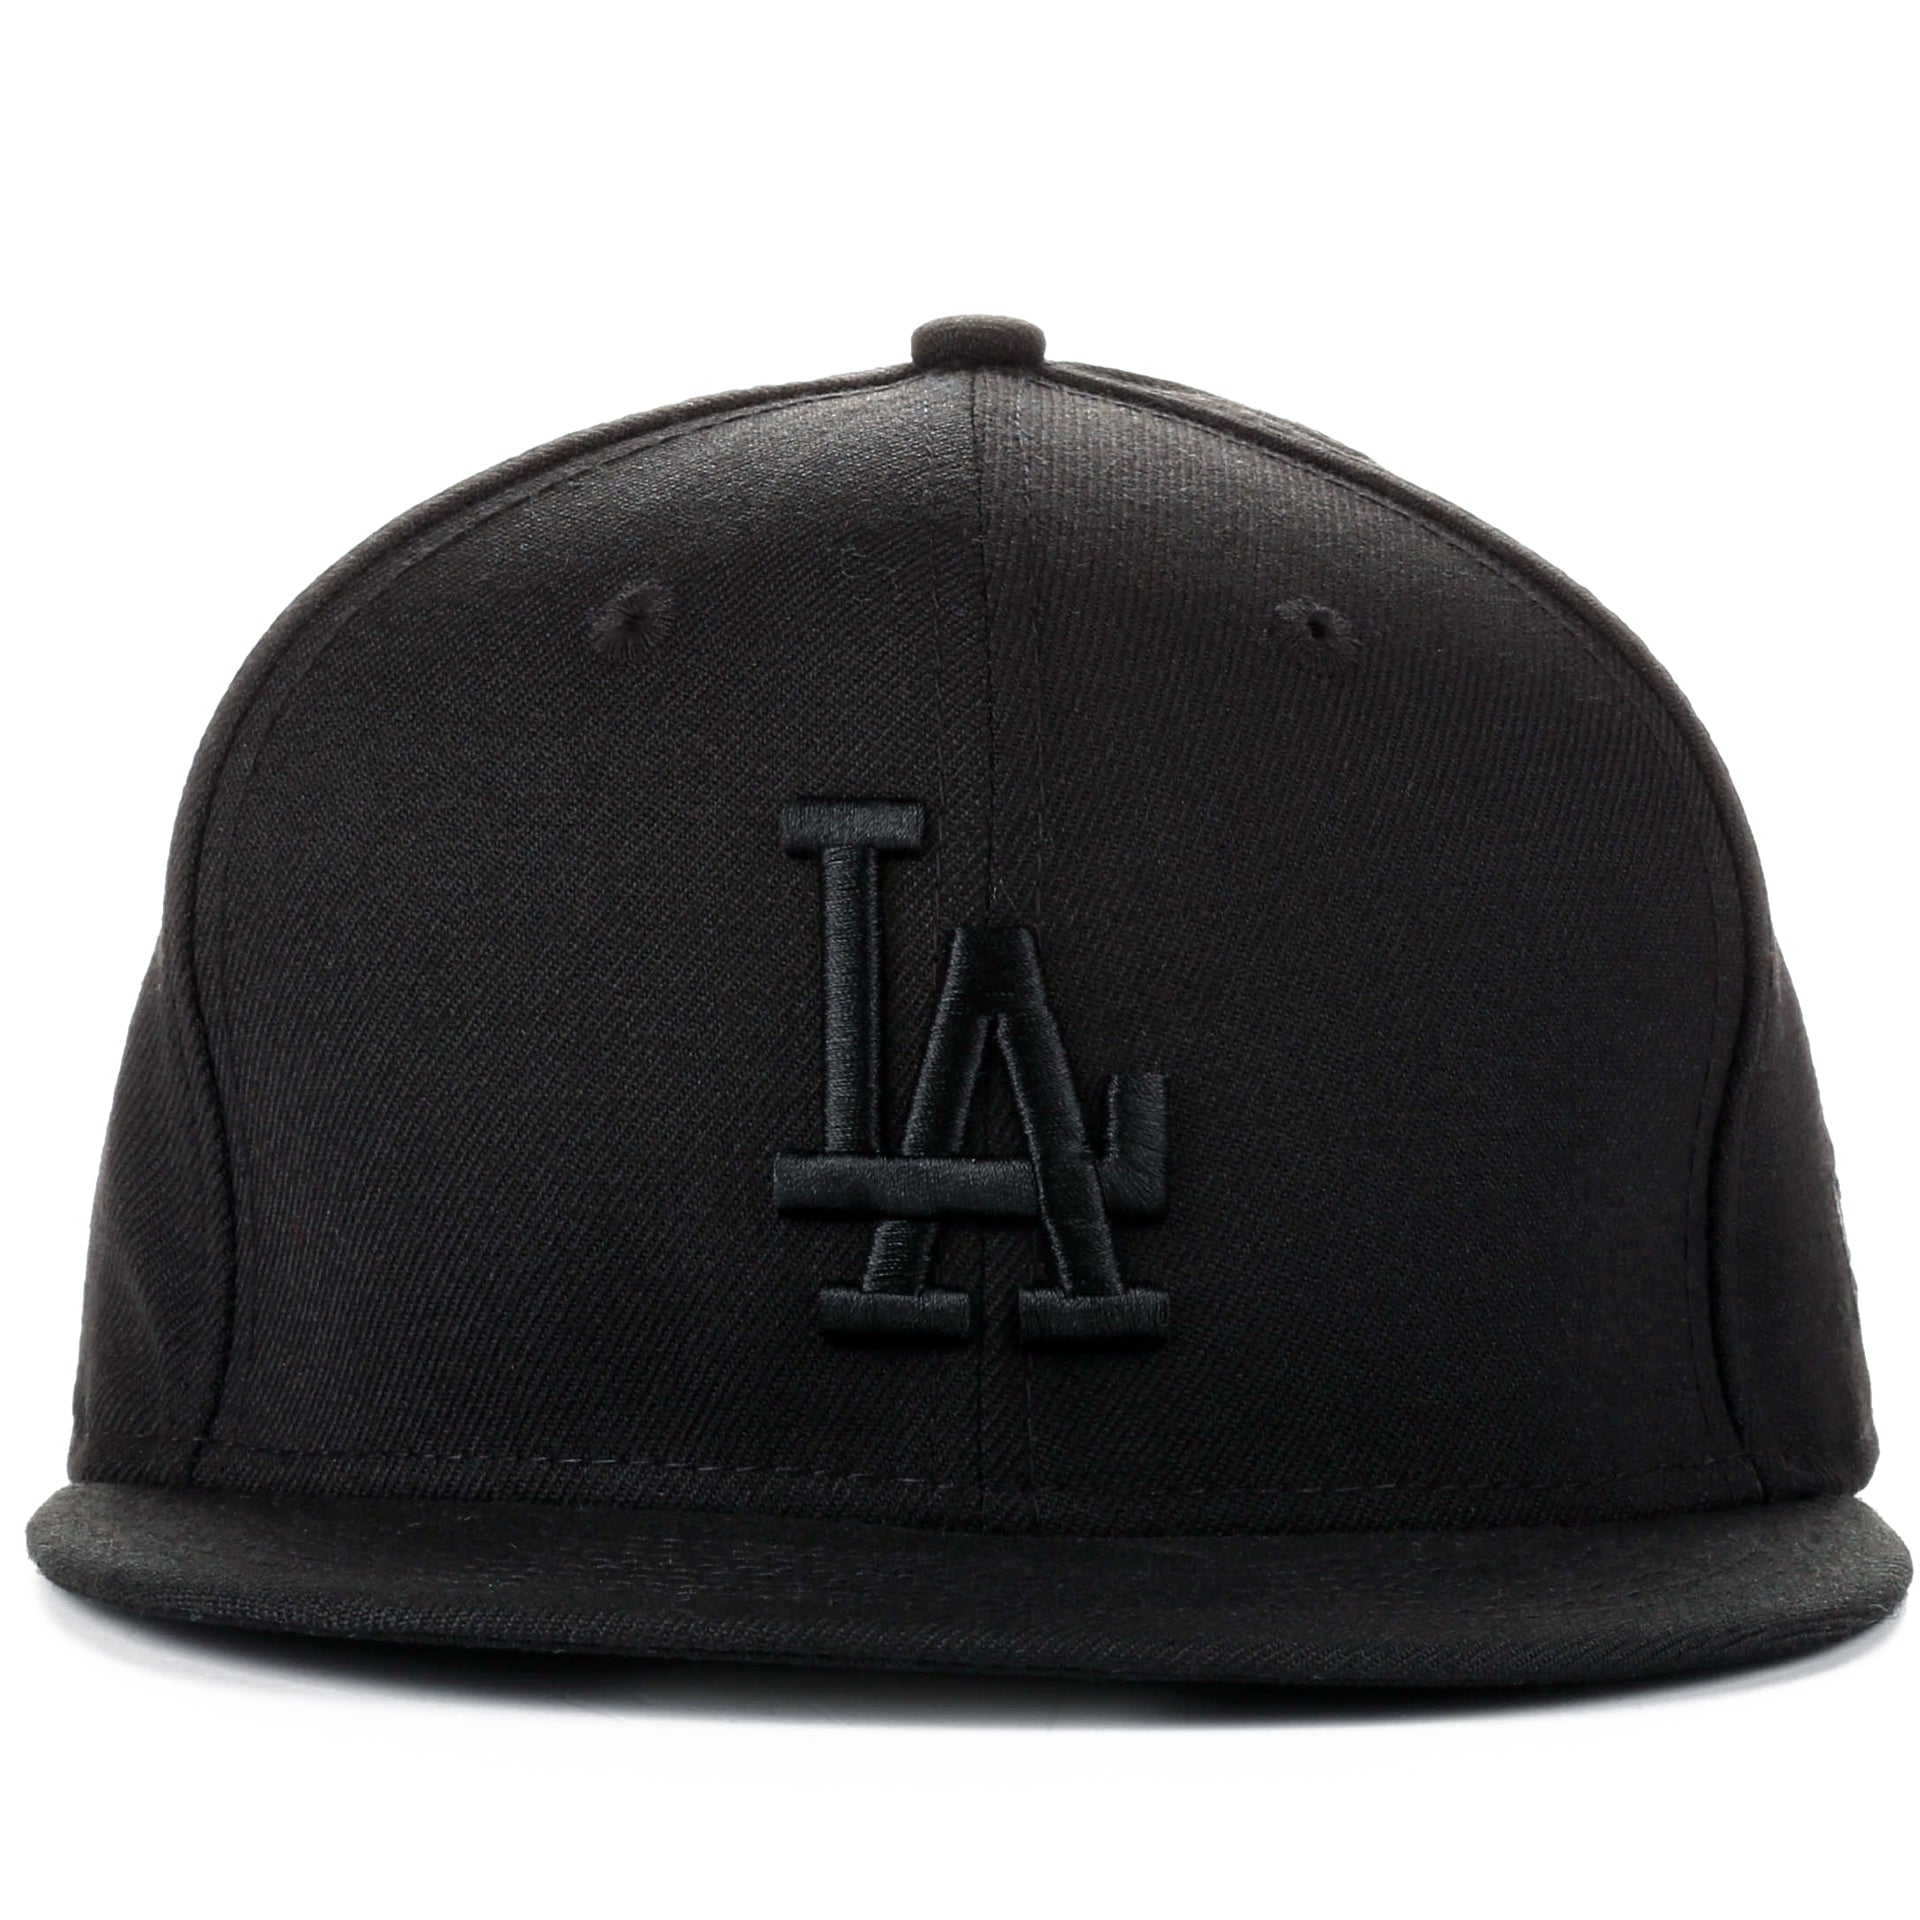 New Era 59Fifty Fitted Cap - Los Angeles Dodgers/Black/Black - New